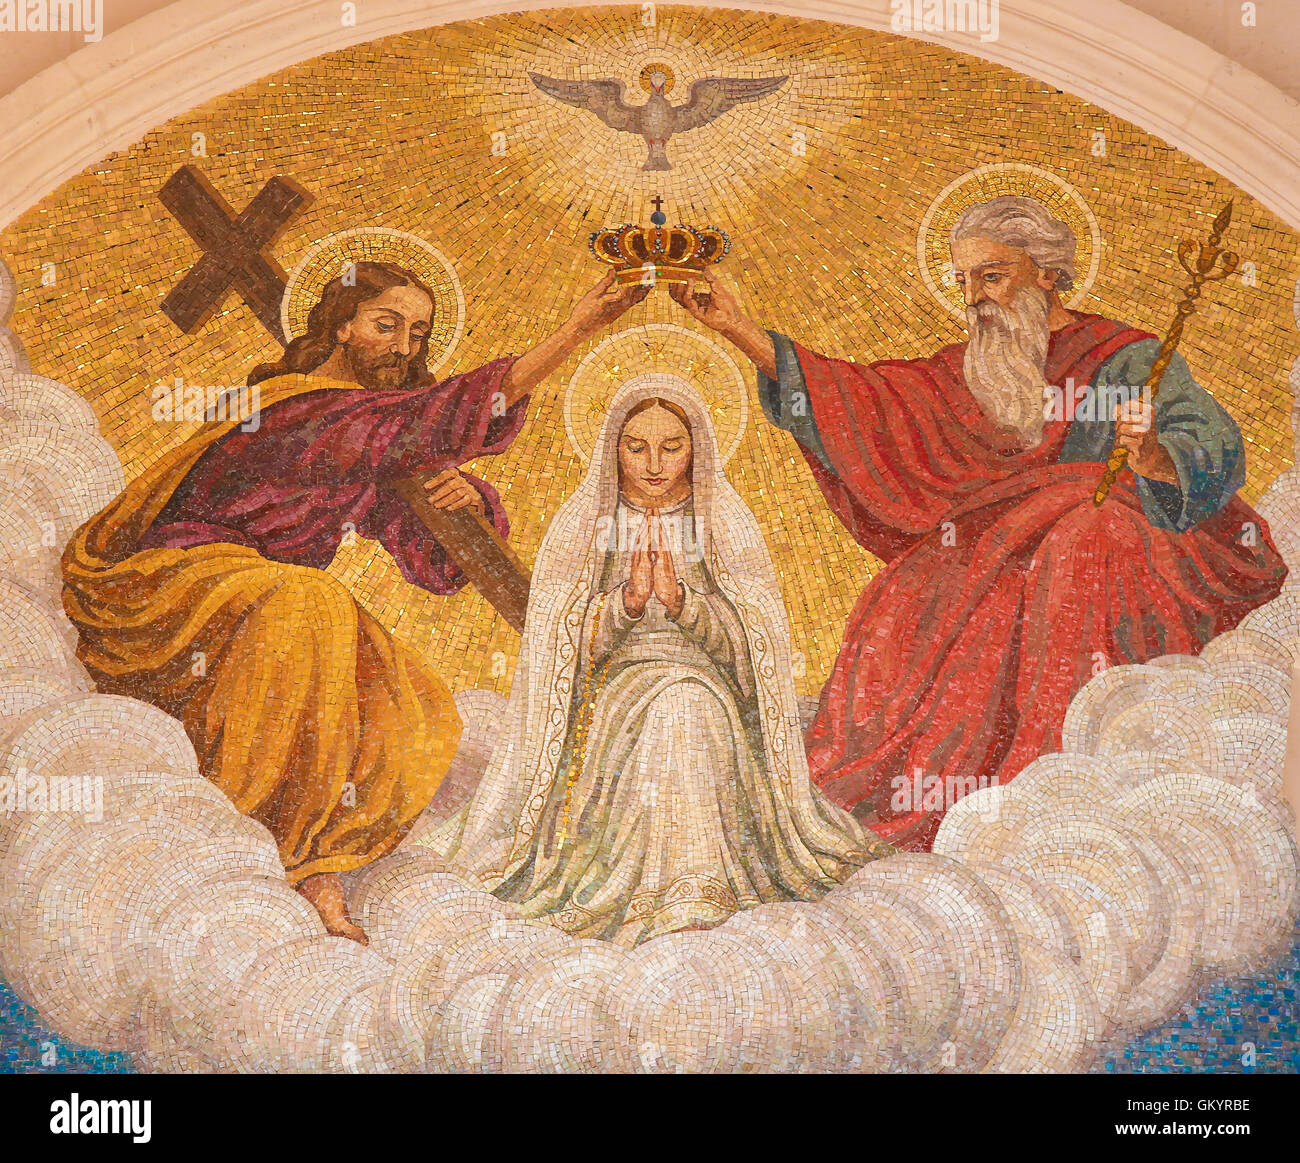 Painting of the Coronation of Mother Mary by the Holy Trinity at the Sanctuary of Fatima in Portugal Stock Photo